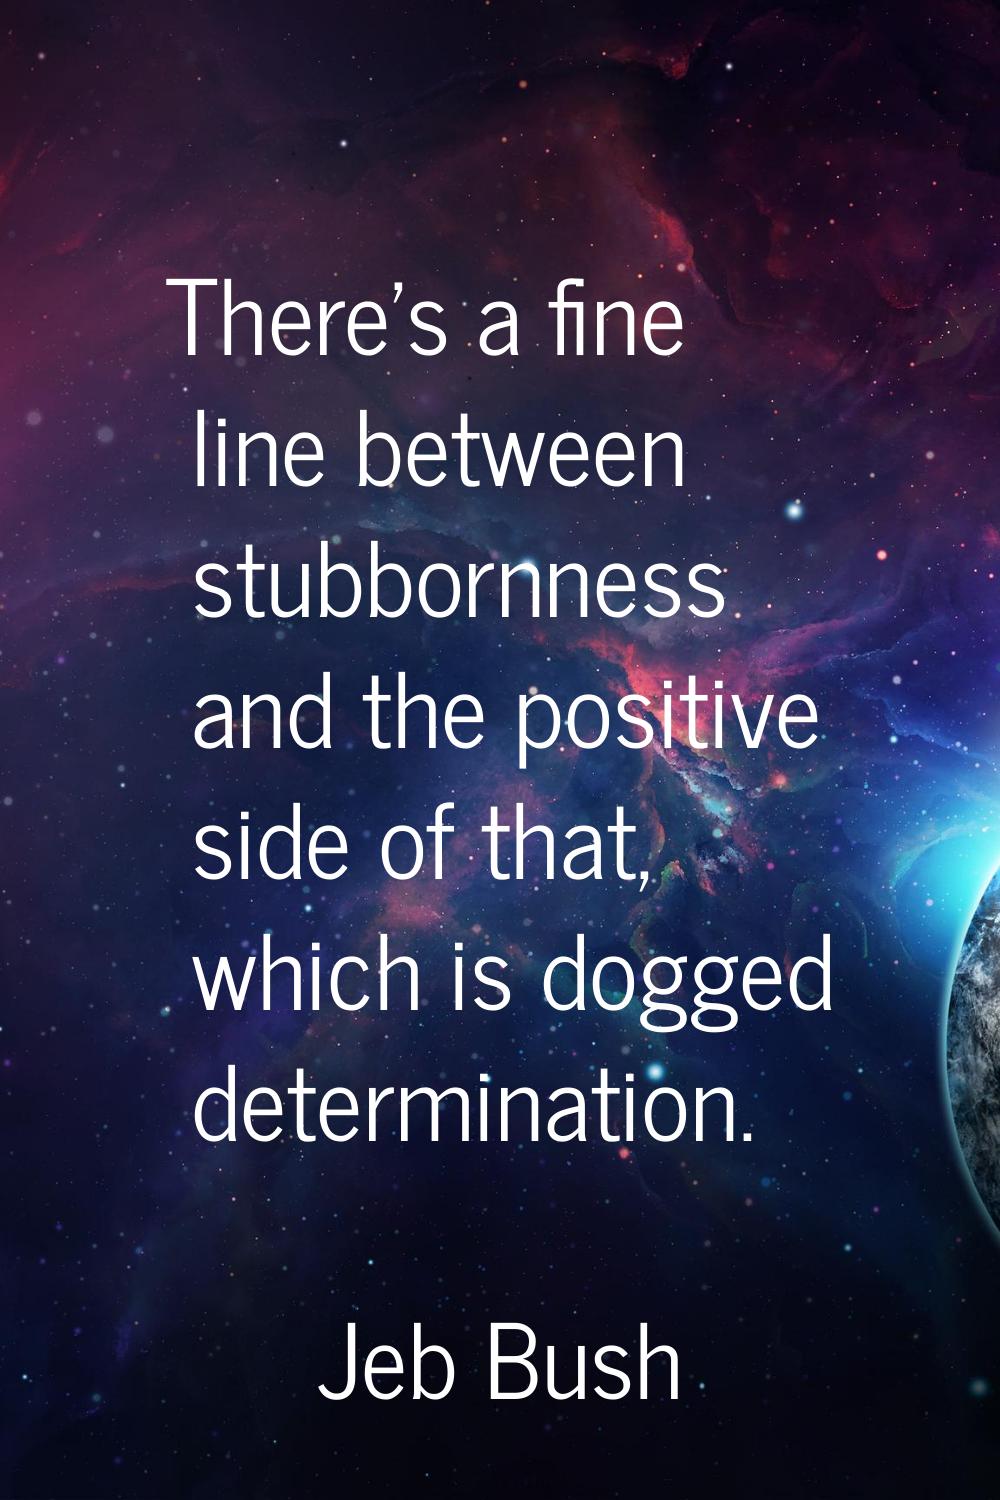 There's a fine line between stubbornness and the positive side of that, which is dogged determinati